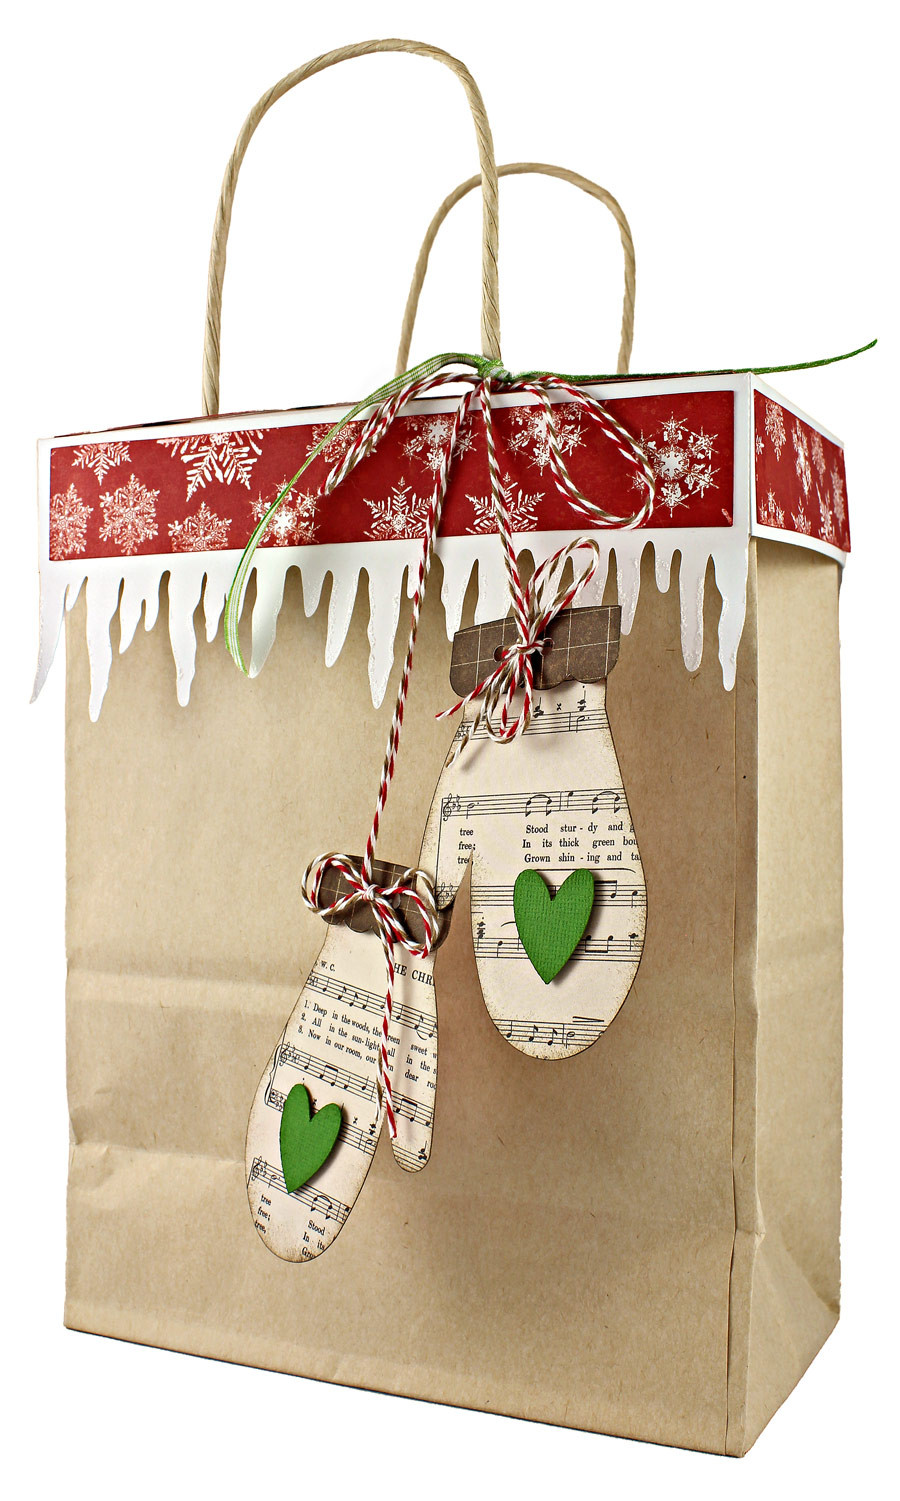 Holiday Gift Bag Ideas
 12 Gifts of Christmas Day 3 Gift Bag Topper Pazzles